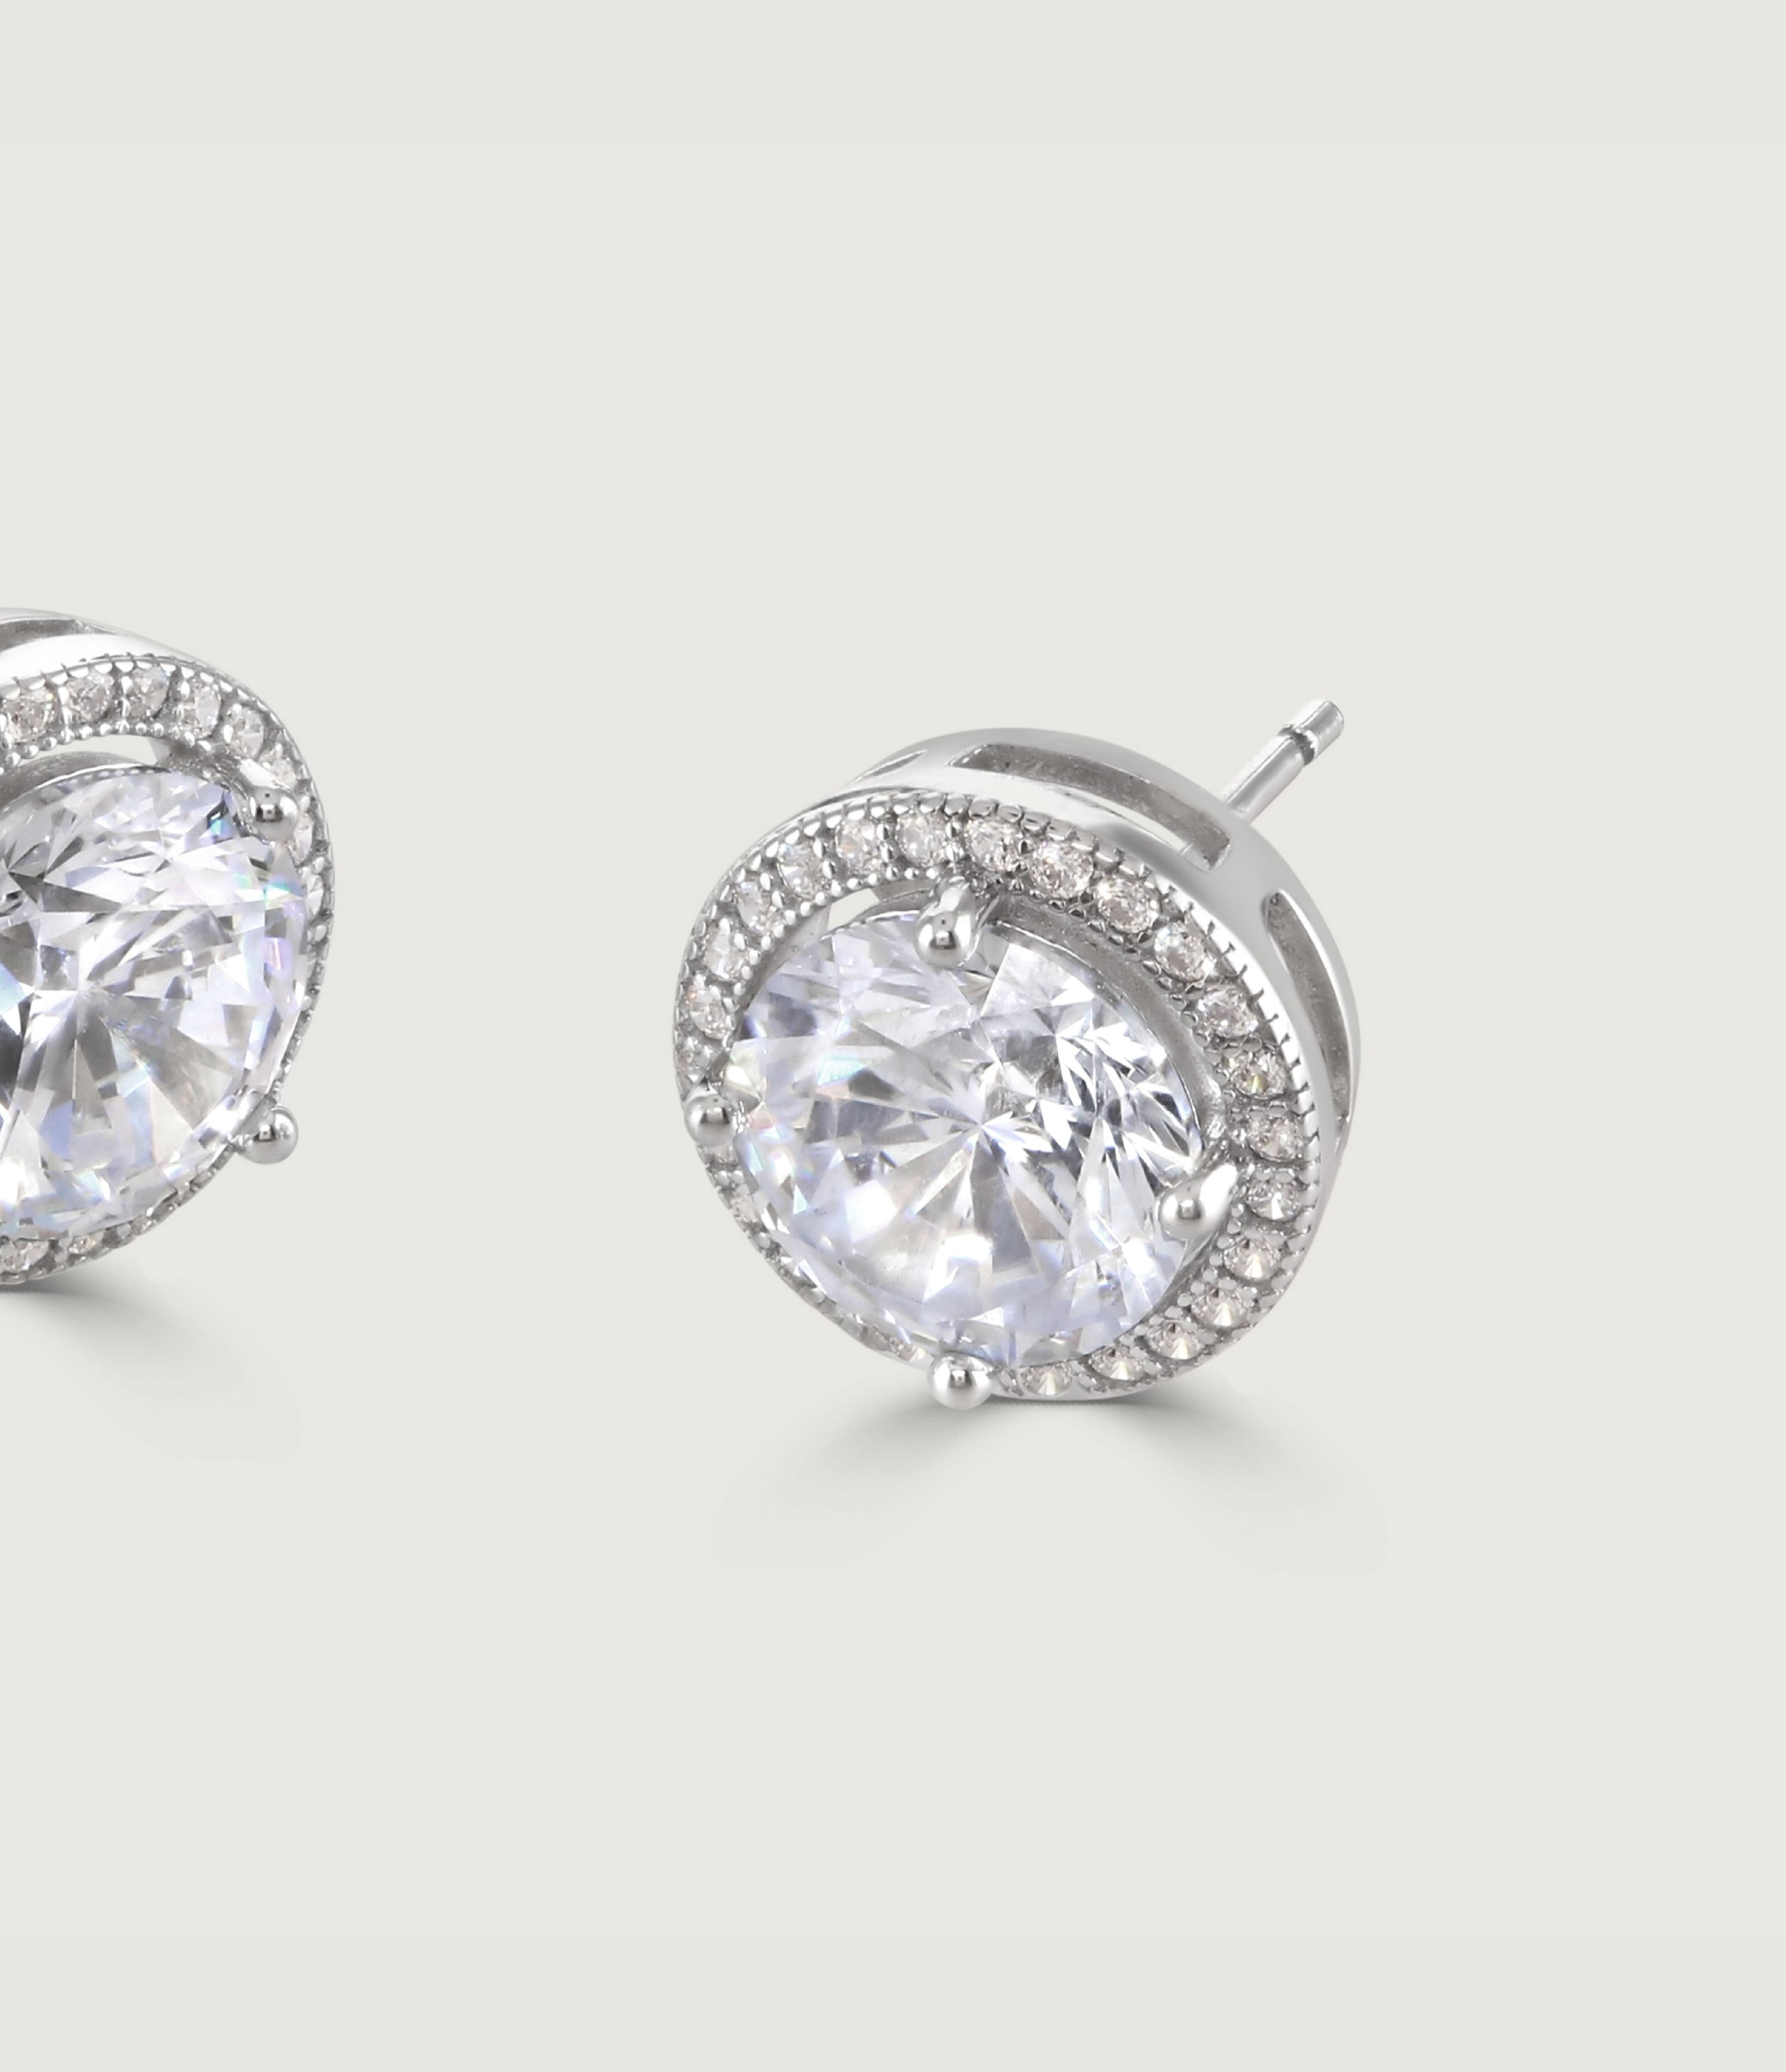 Clear Halo Solitaire Earrings